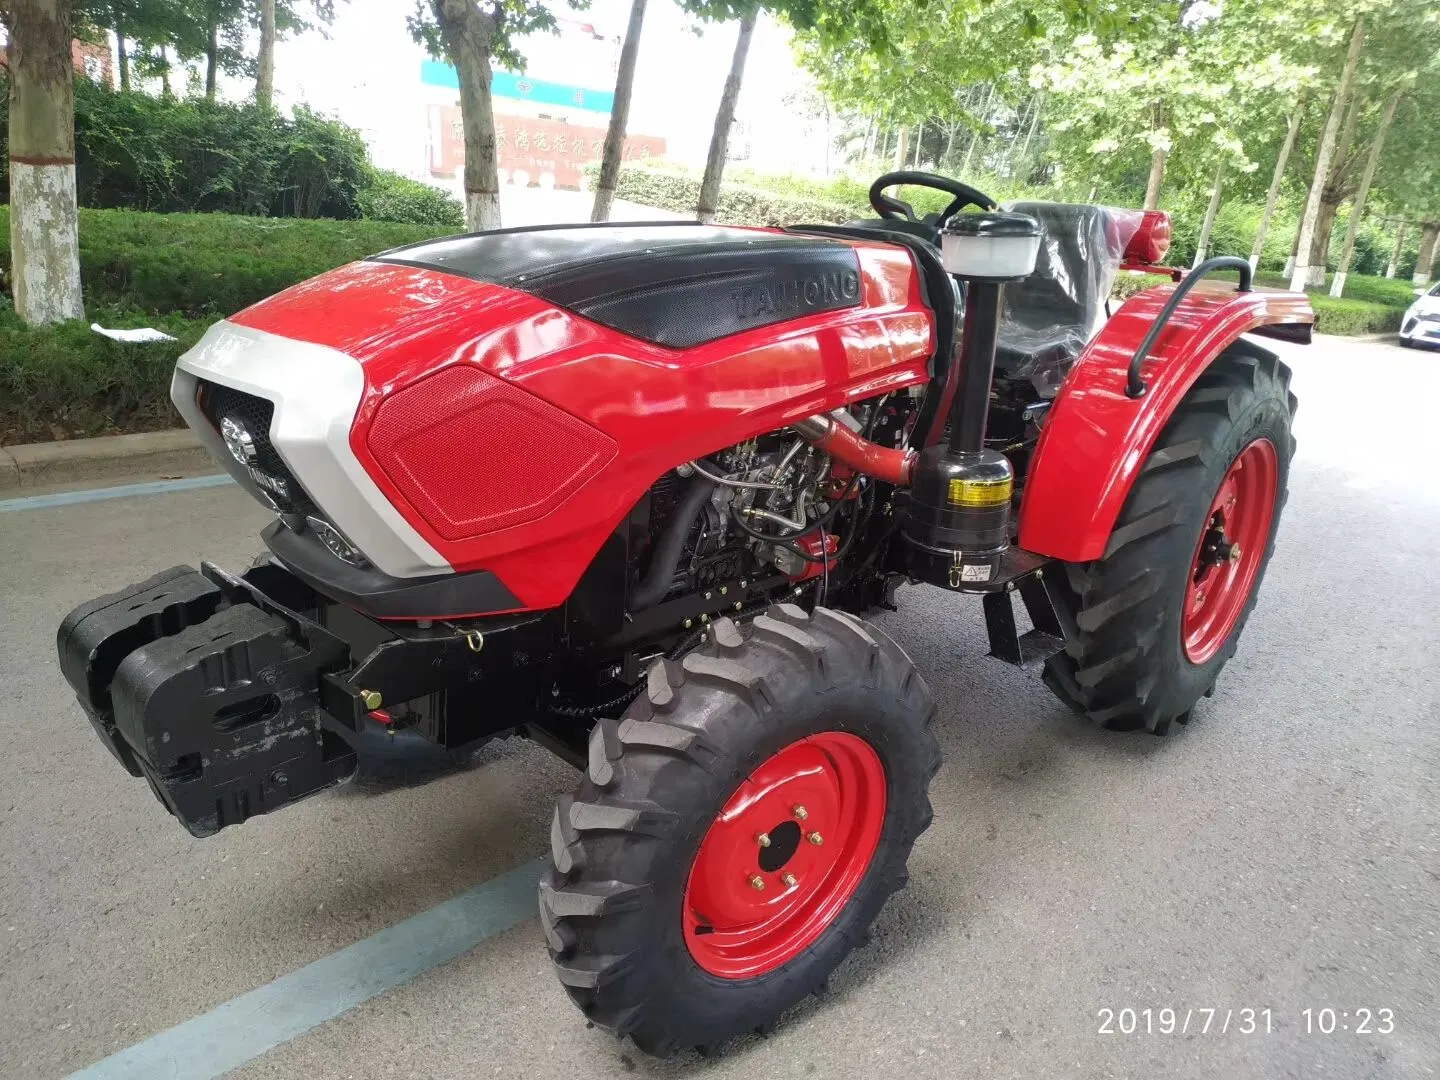 Chinese Tractor Factory Supply 45HP Tractor, Farm Tractor, 4 Wheel Drive Agriculture Tractor, Mini Tractor for Greenhouse, Garden Loader